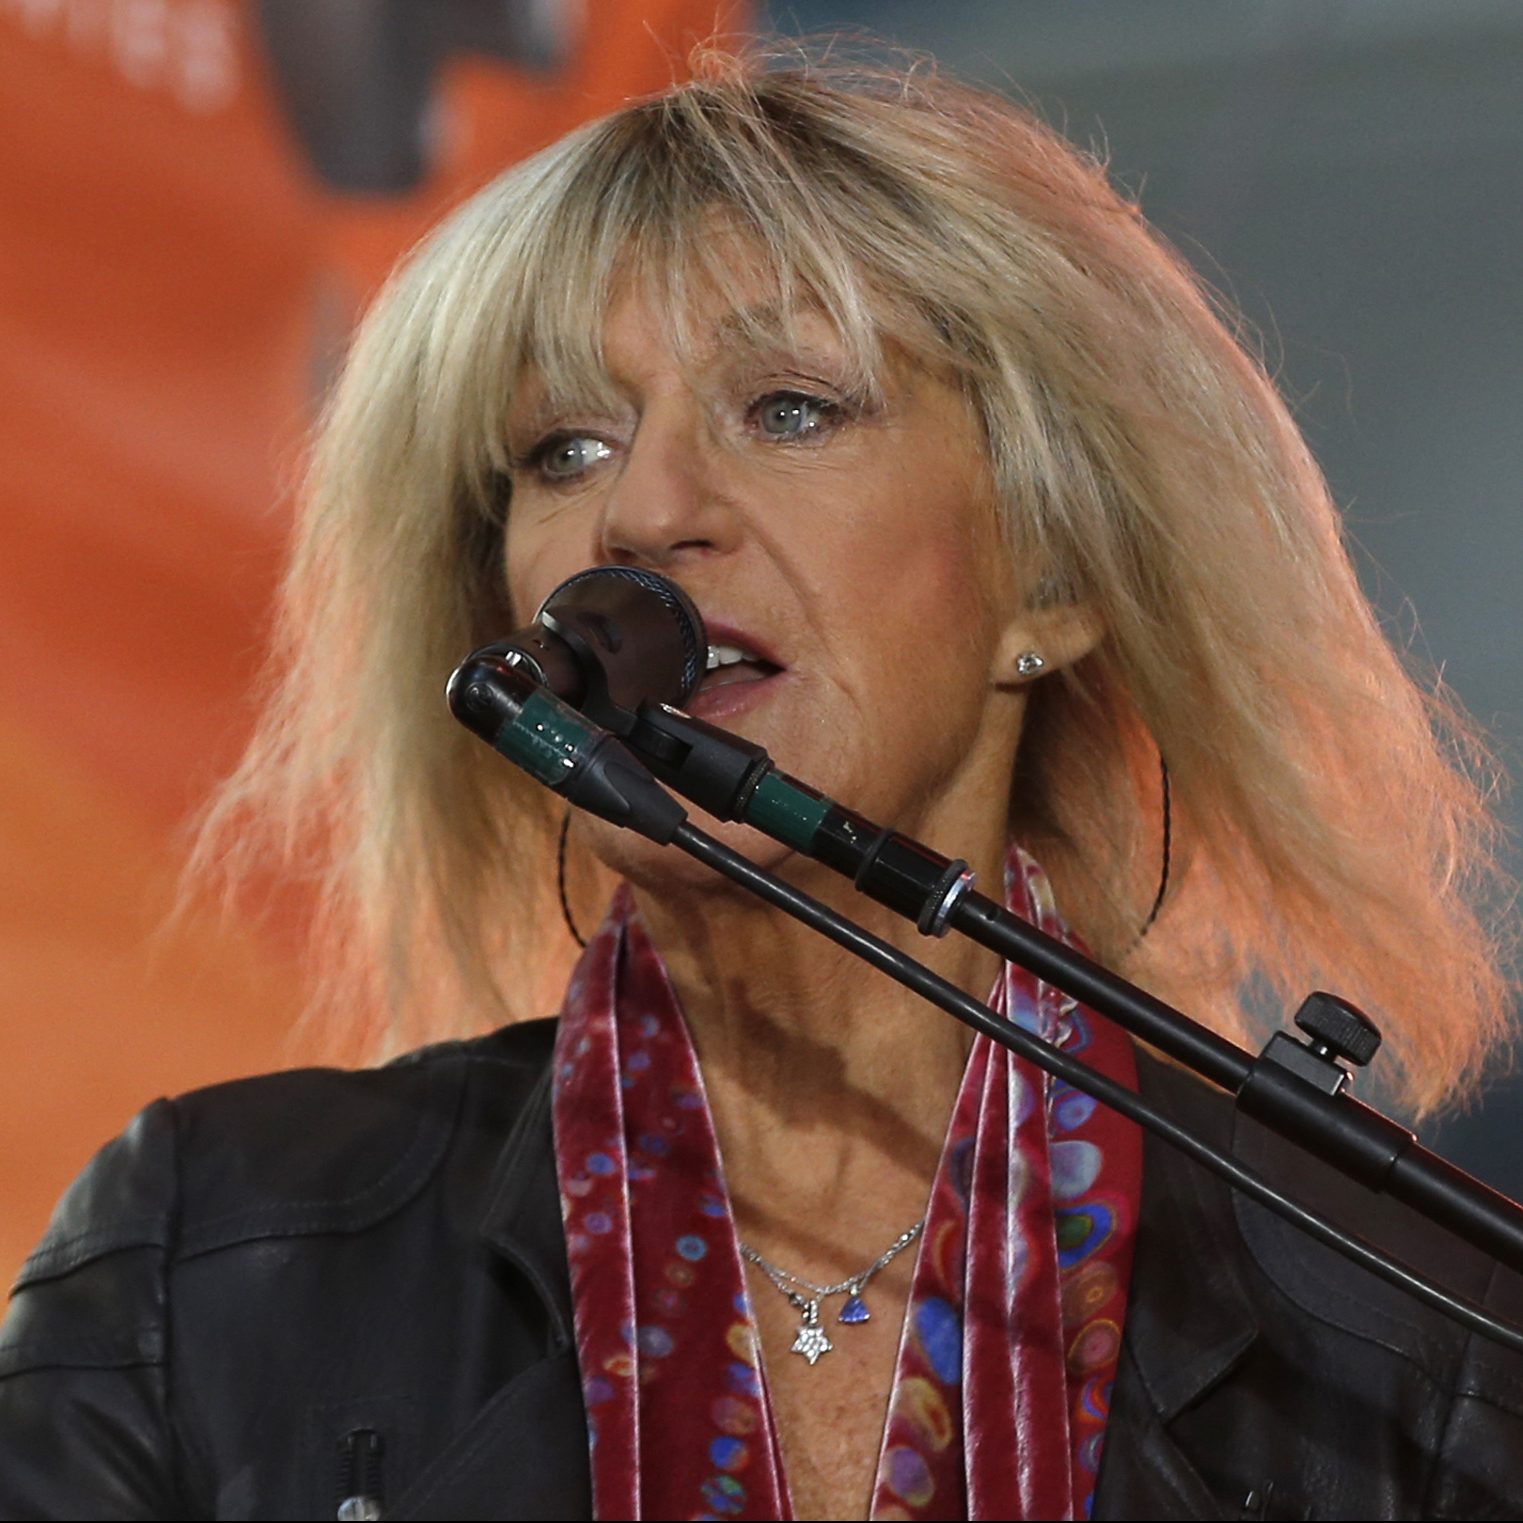 Keyboardist and singer Christine McVie of the rock band Fleetwood Mac performs on NBC's 'Today' show in New York City